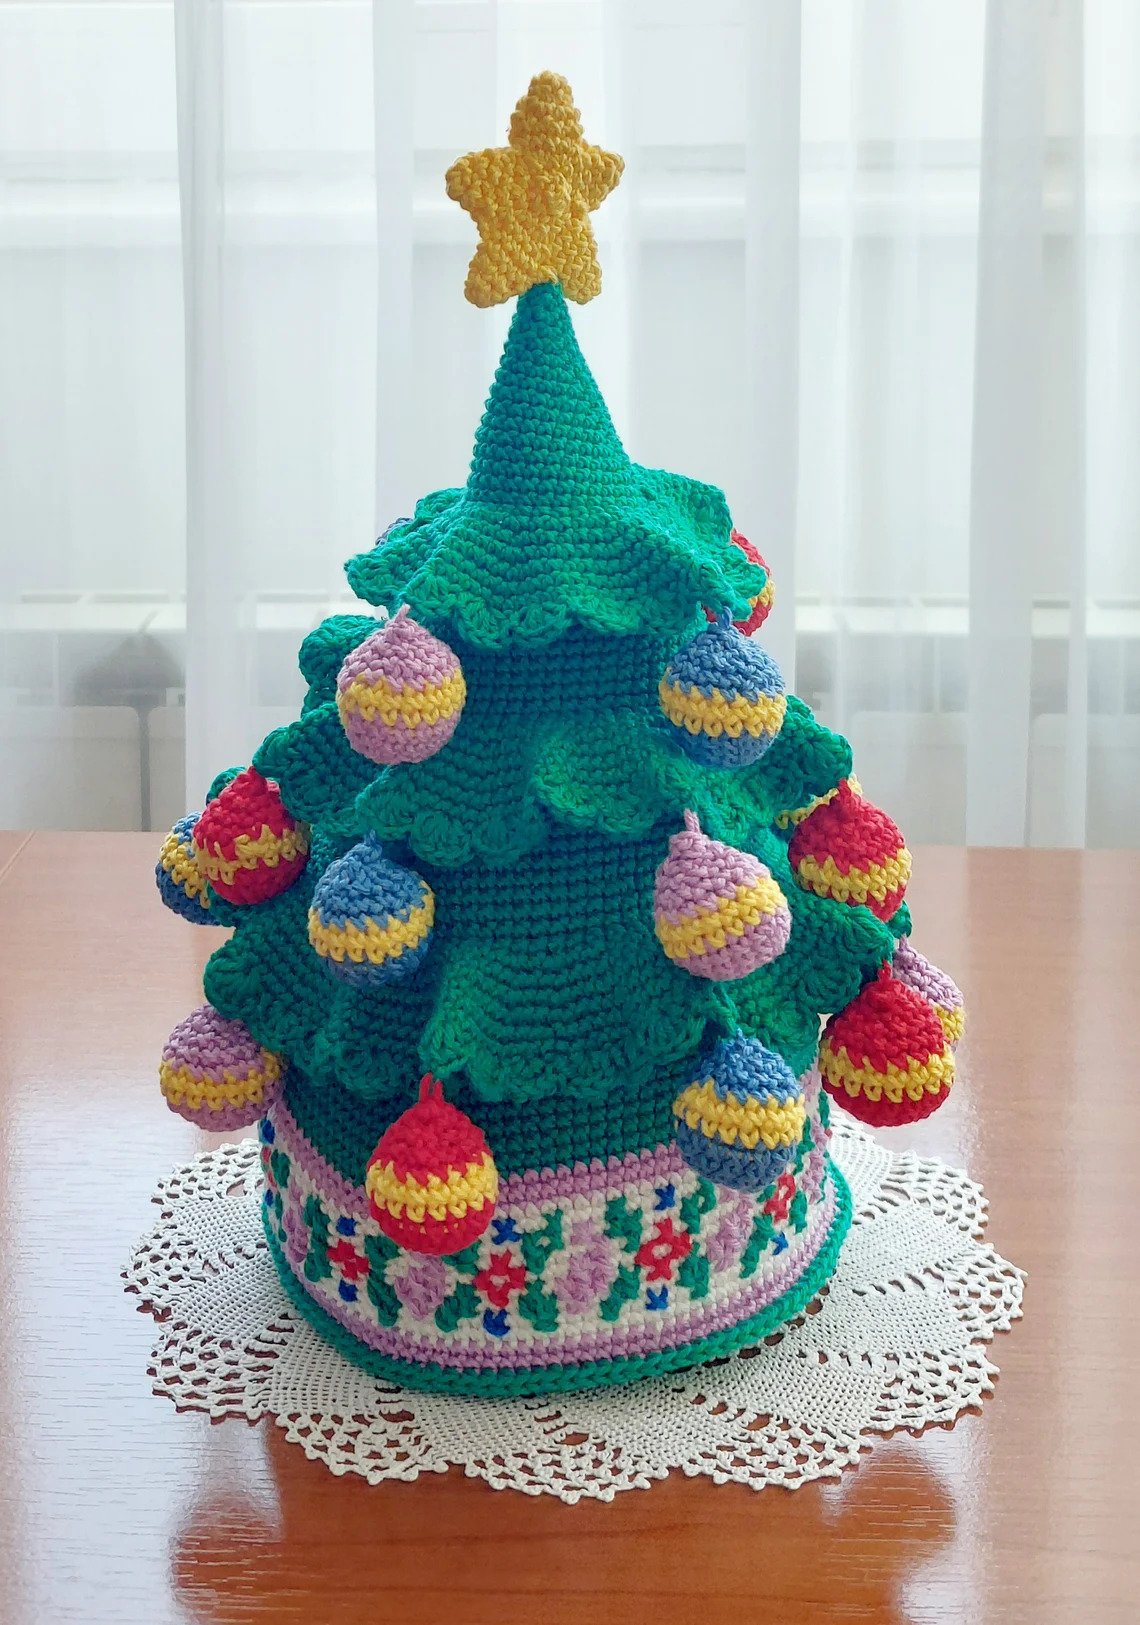 Christmas In July ... Crochet A Funky, Chunky Christmas Tree With A Star On Top